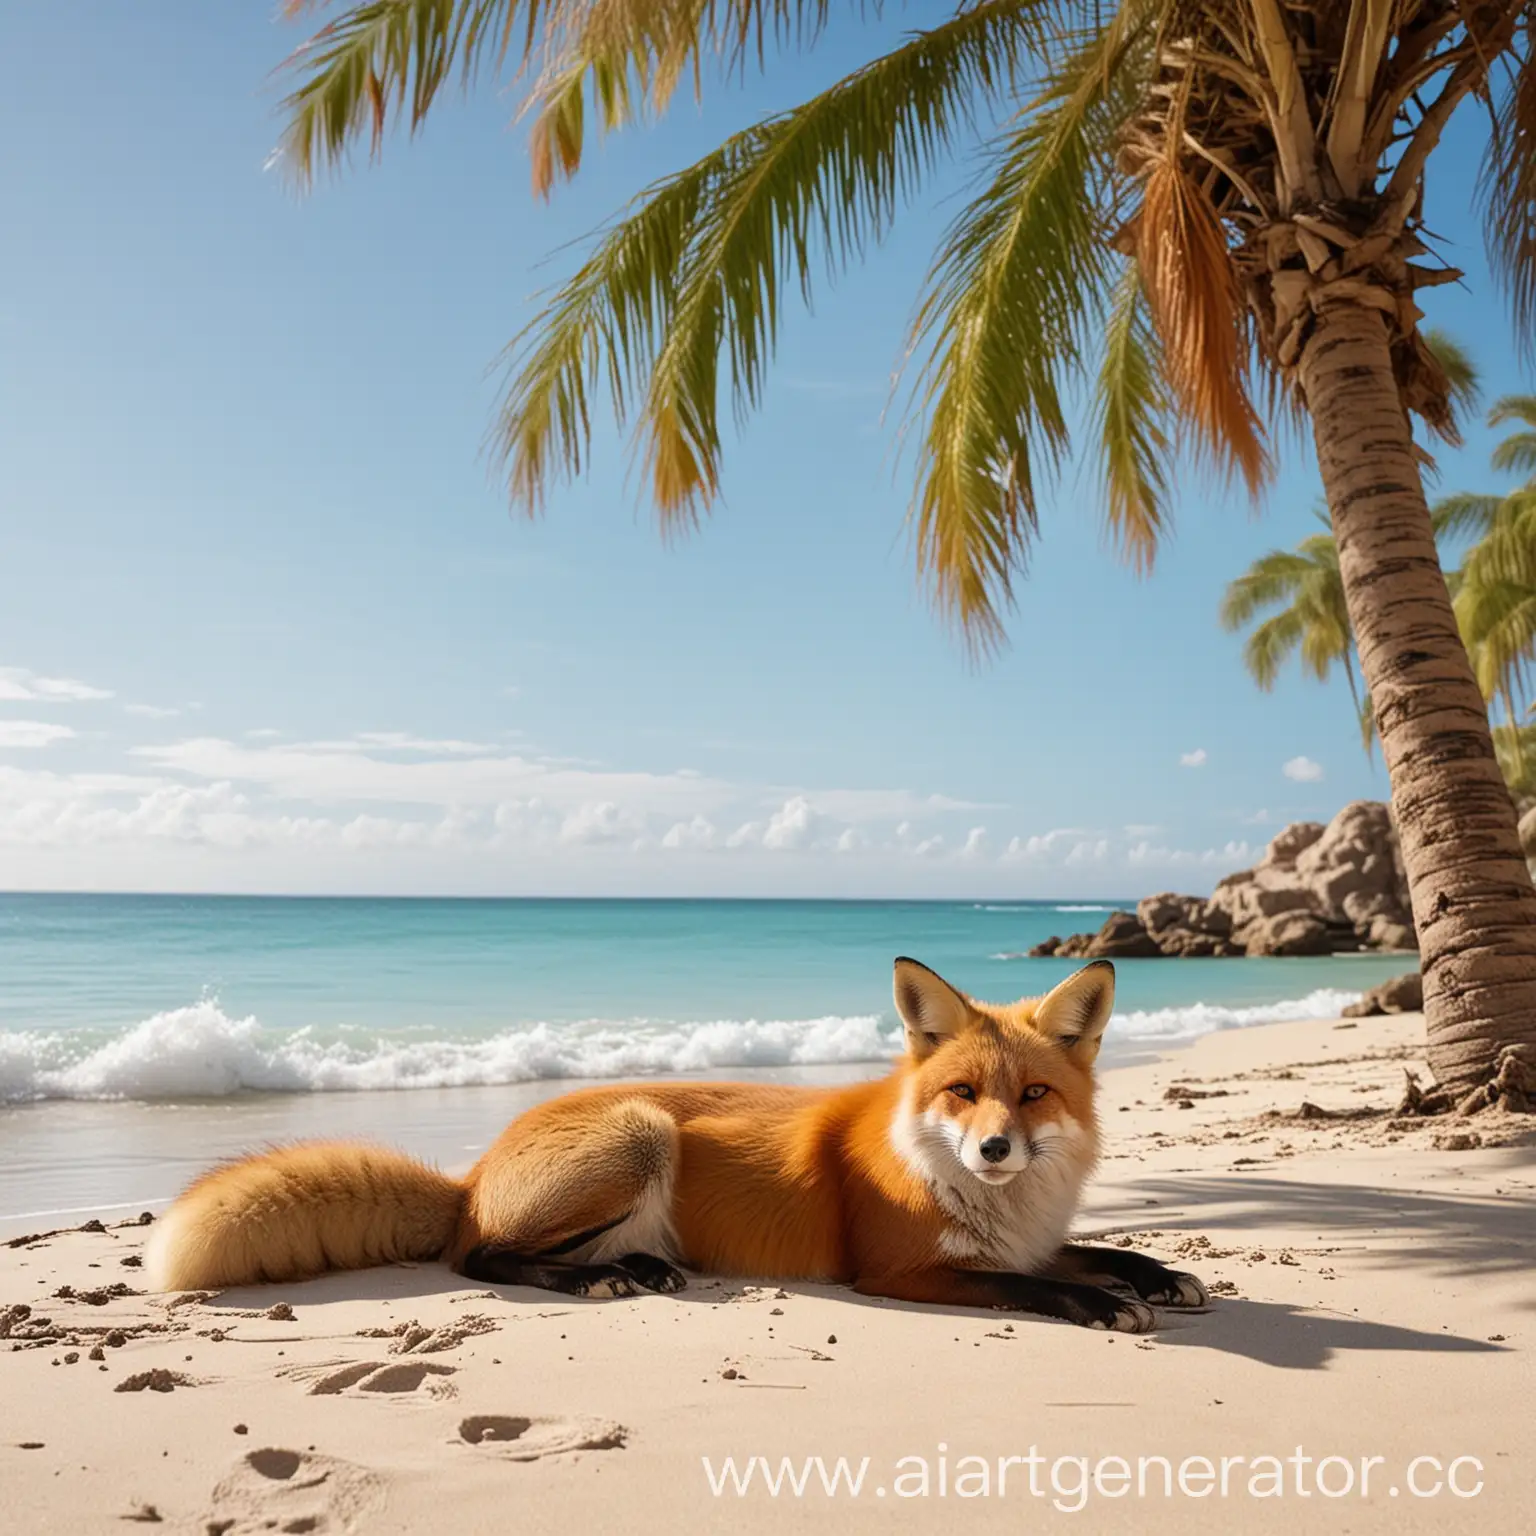 The red fox with a fluffy tail lies on the beach under a palm tree by the sea